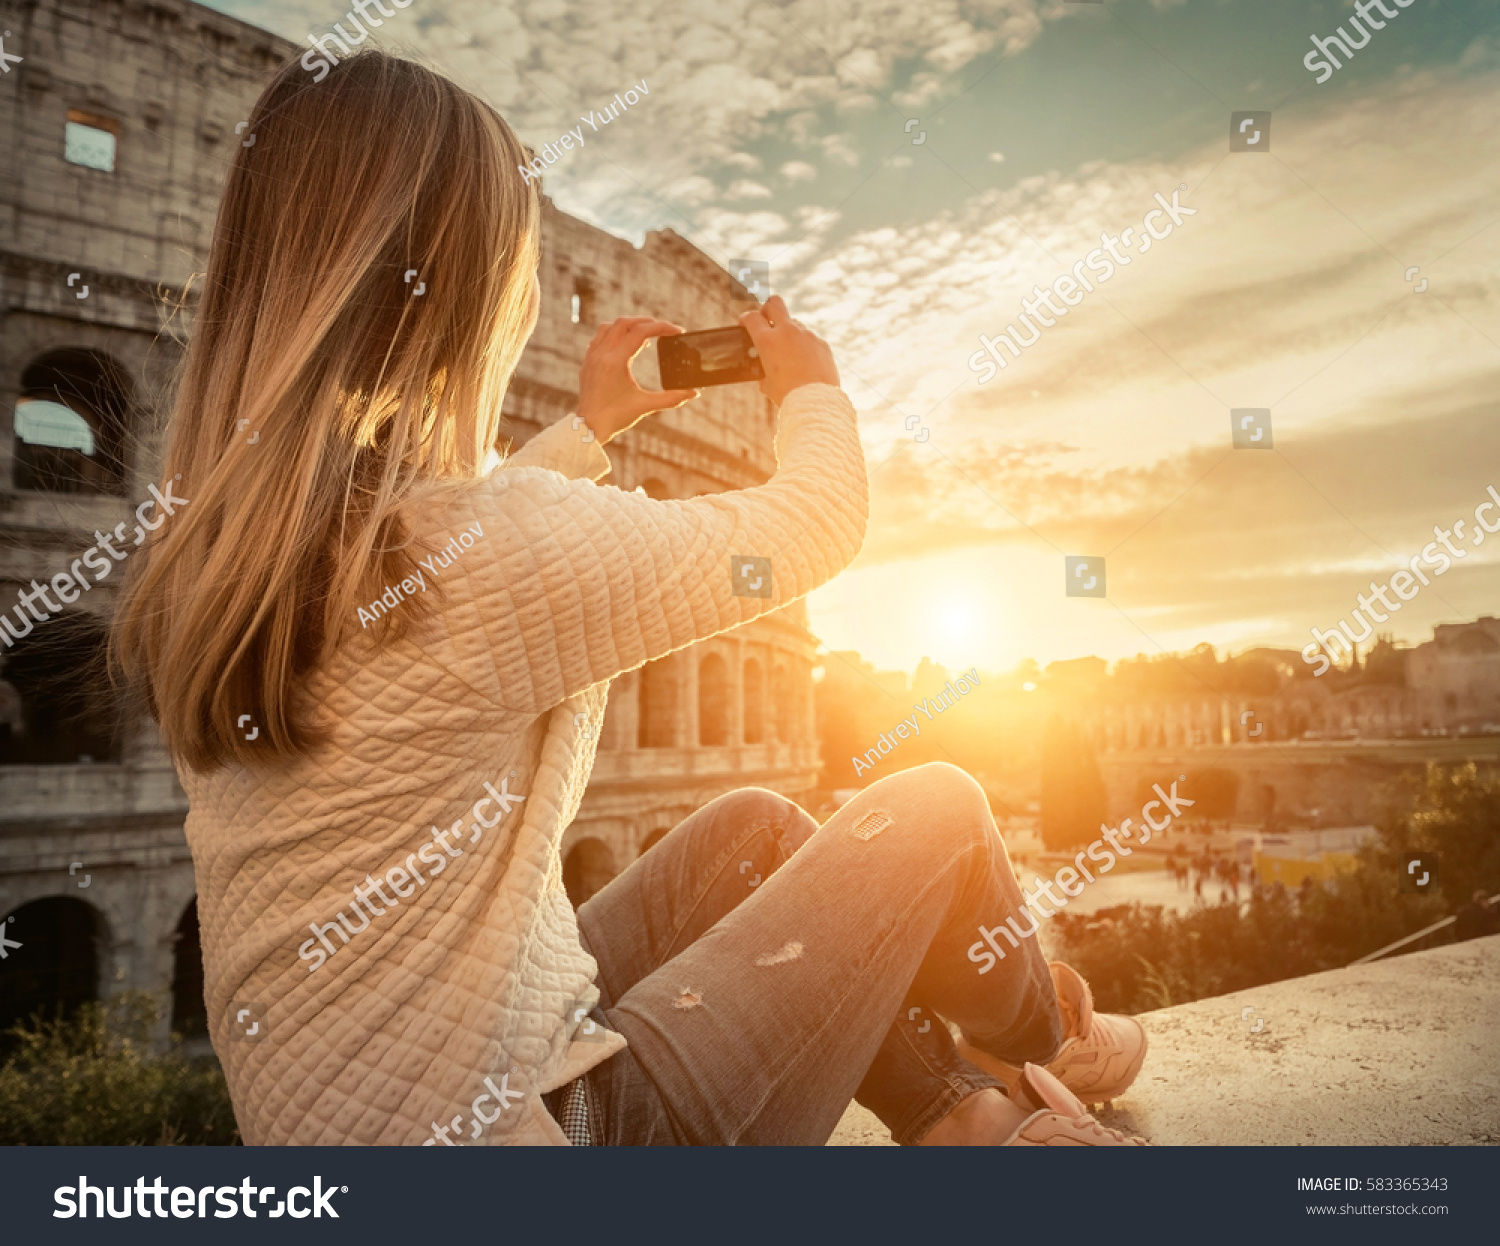 Woman tourist selfie with phone camera in hands near the Coliseum in Rome under sunlight and blue sky. Famous popular touristic place in the world. #583365343